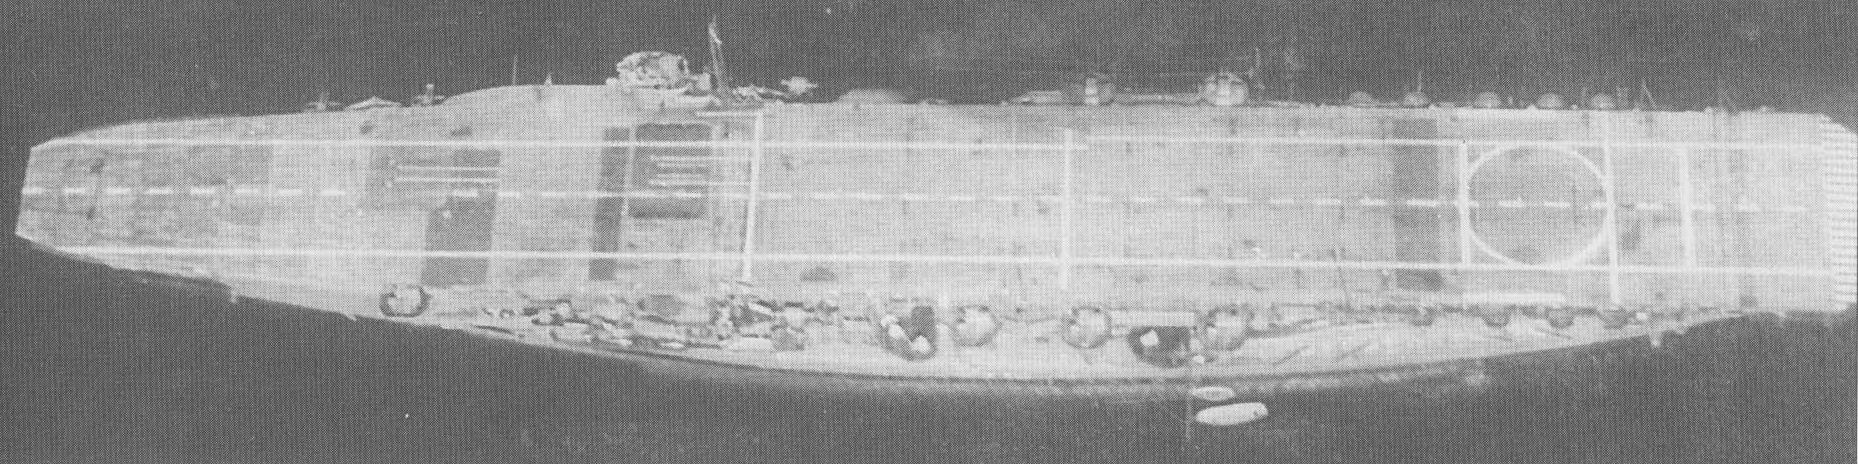 Aerial view of carrier Kaga, late 1930s